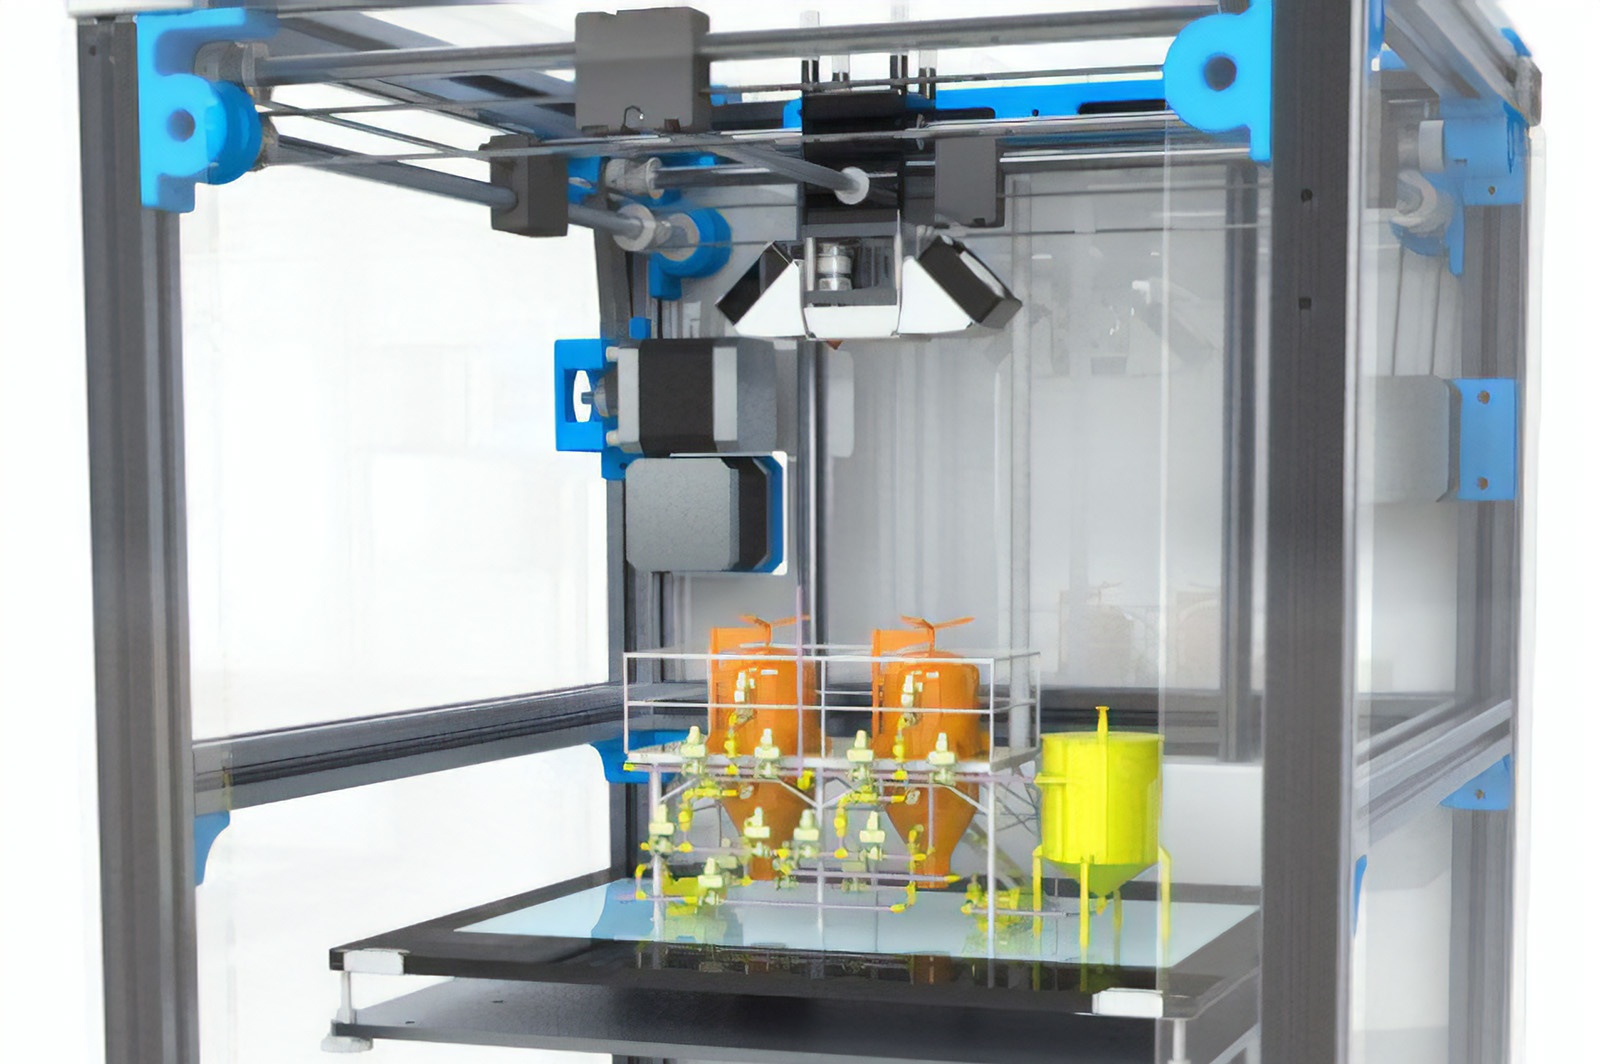 3D printers could let you produce your own drugs